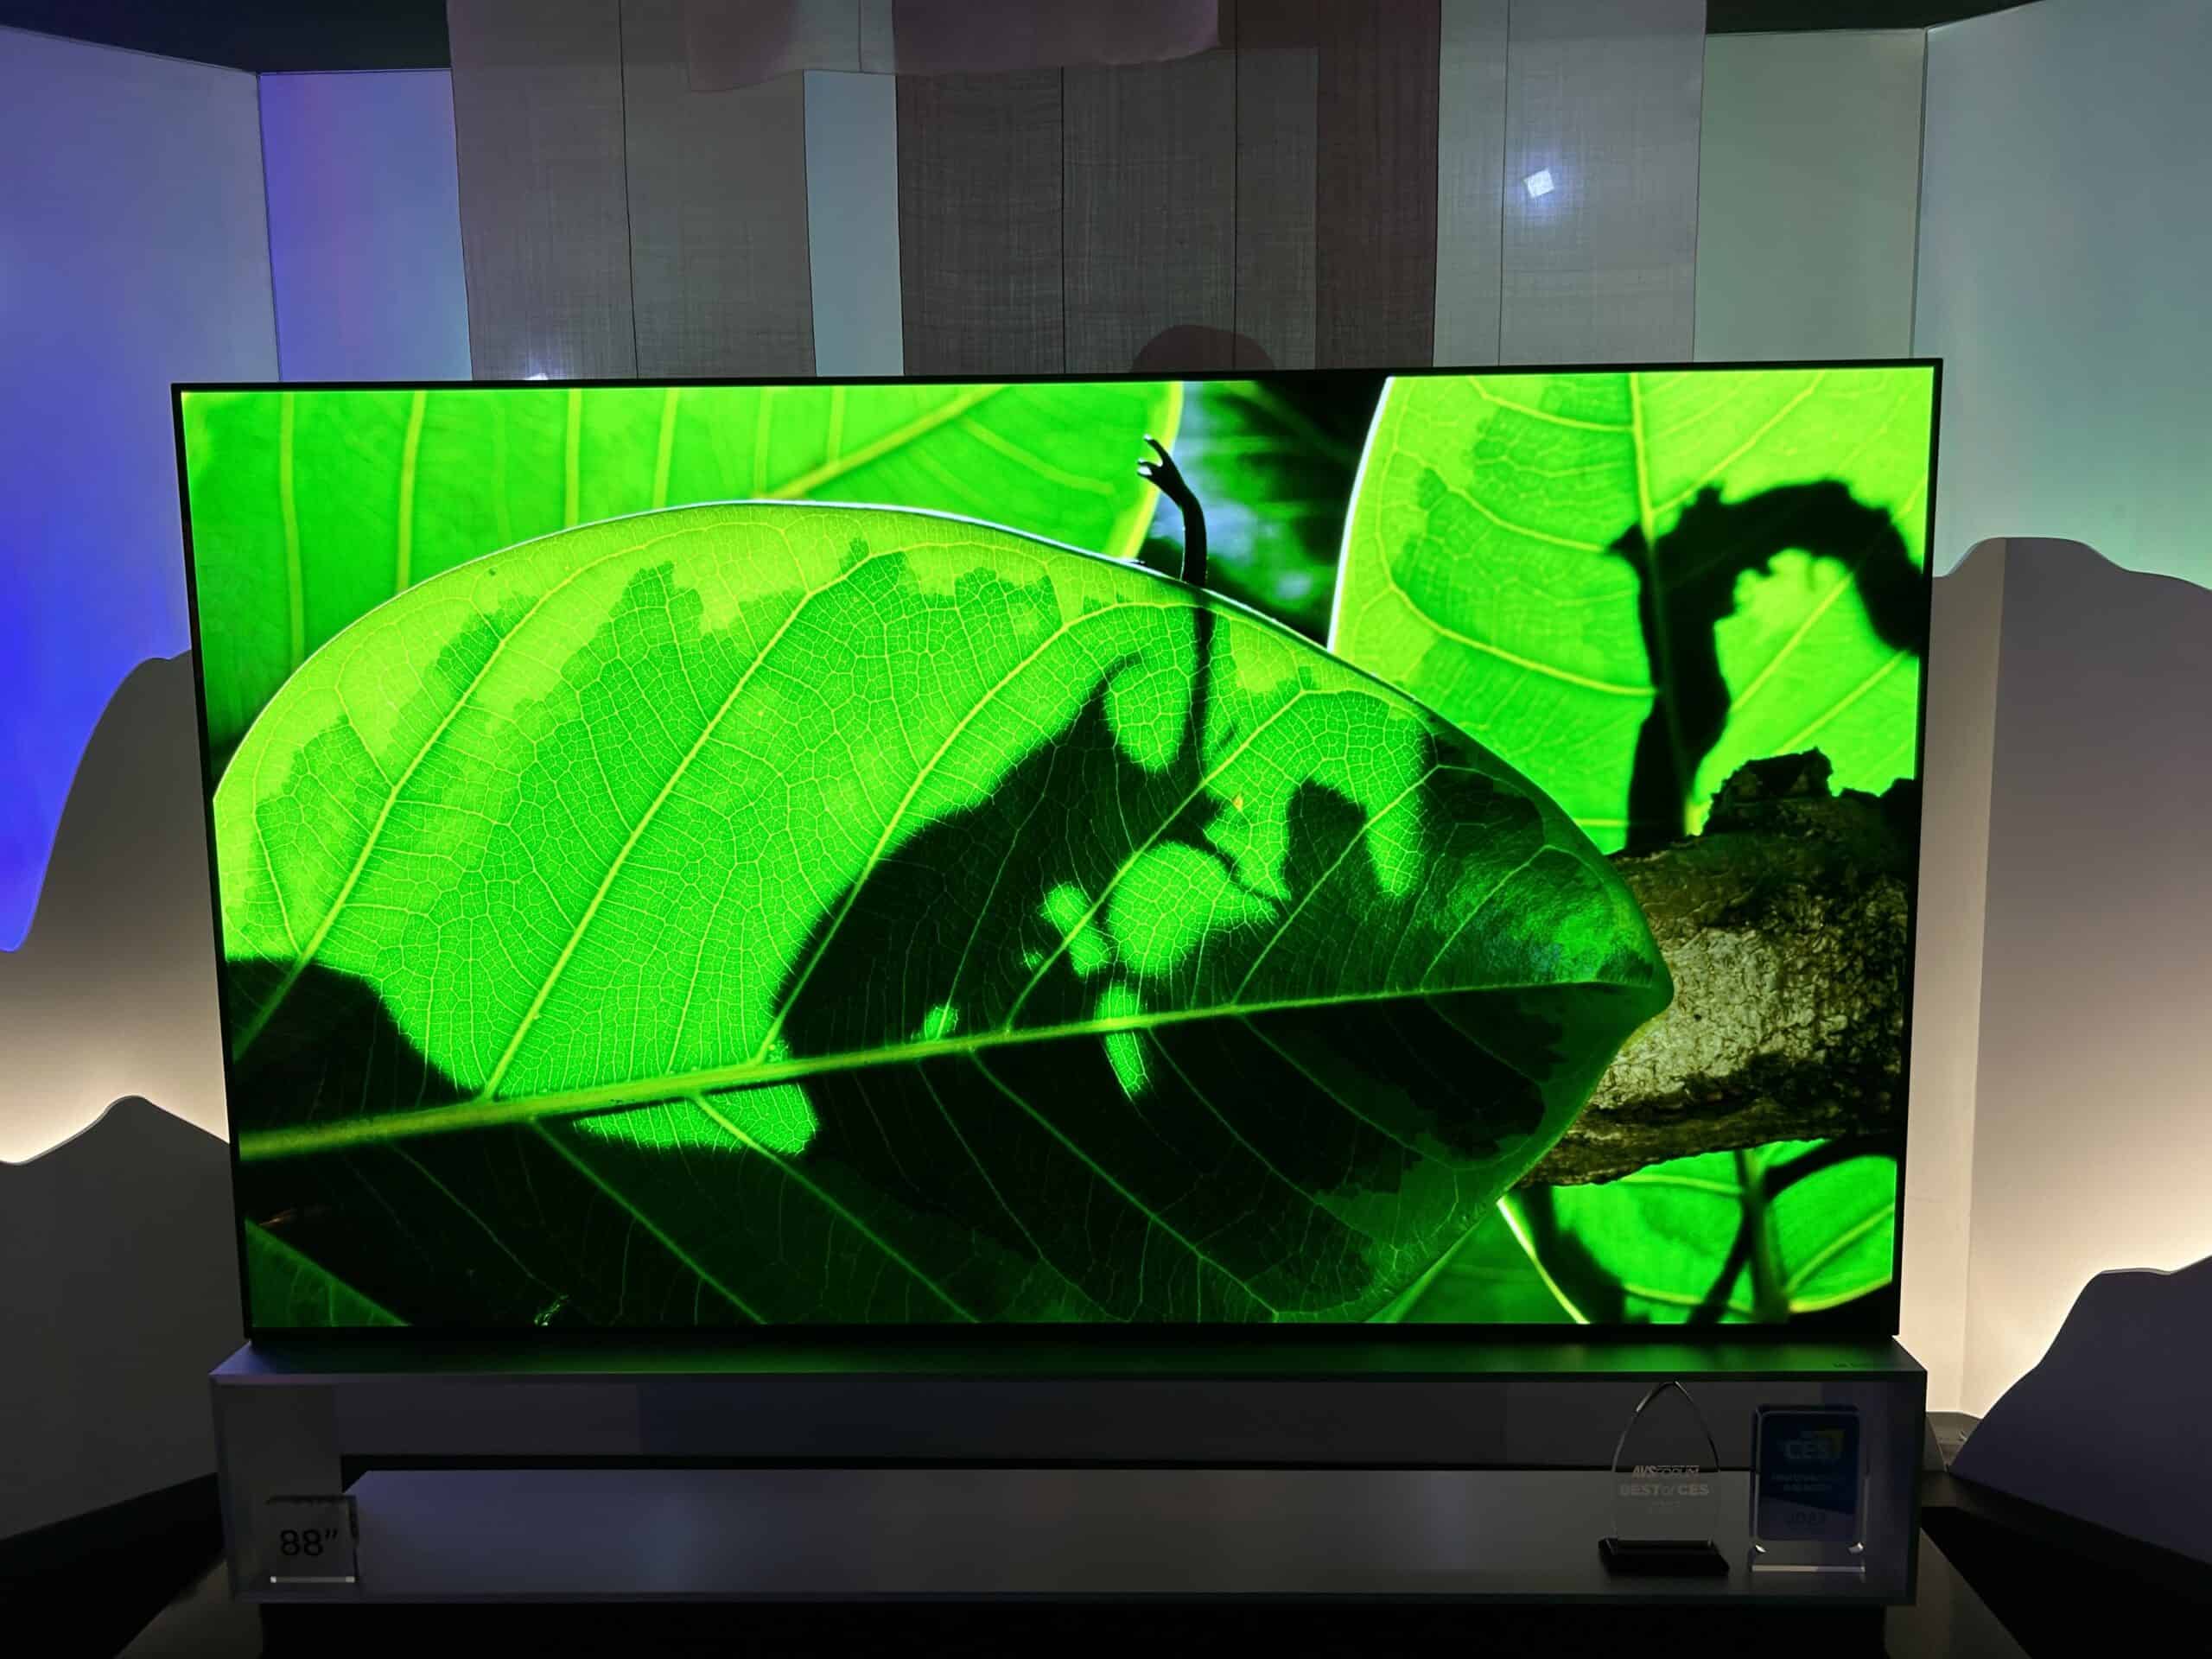 New LG OLED TV at CES 2023